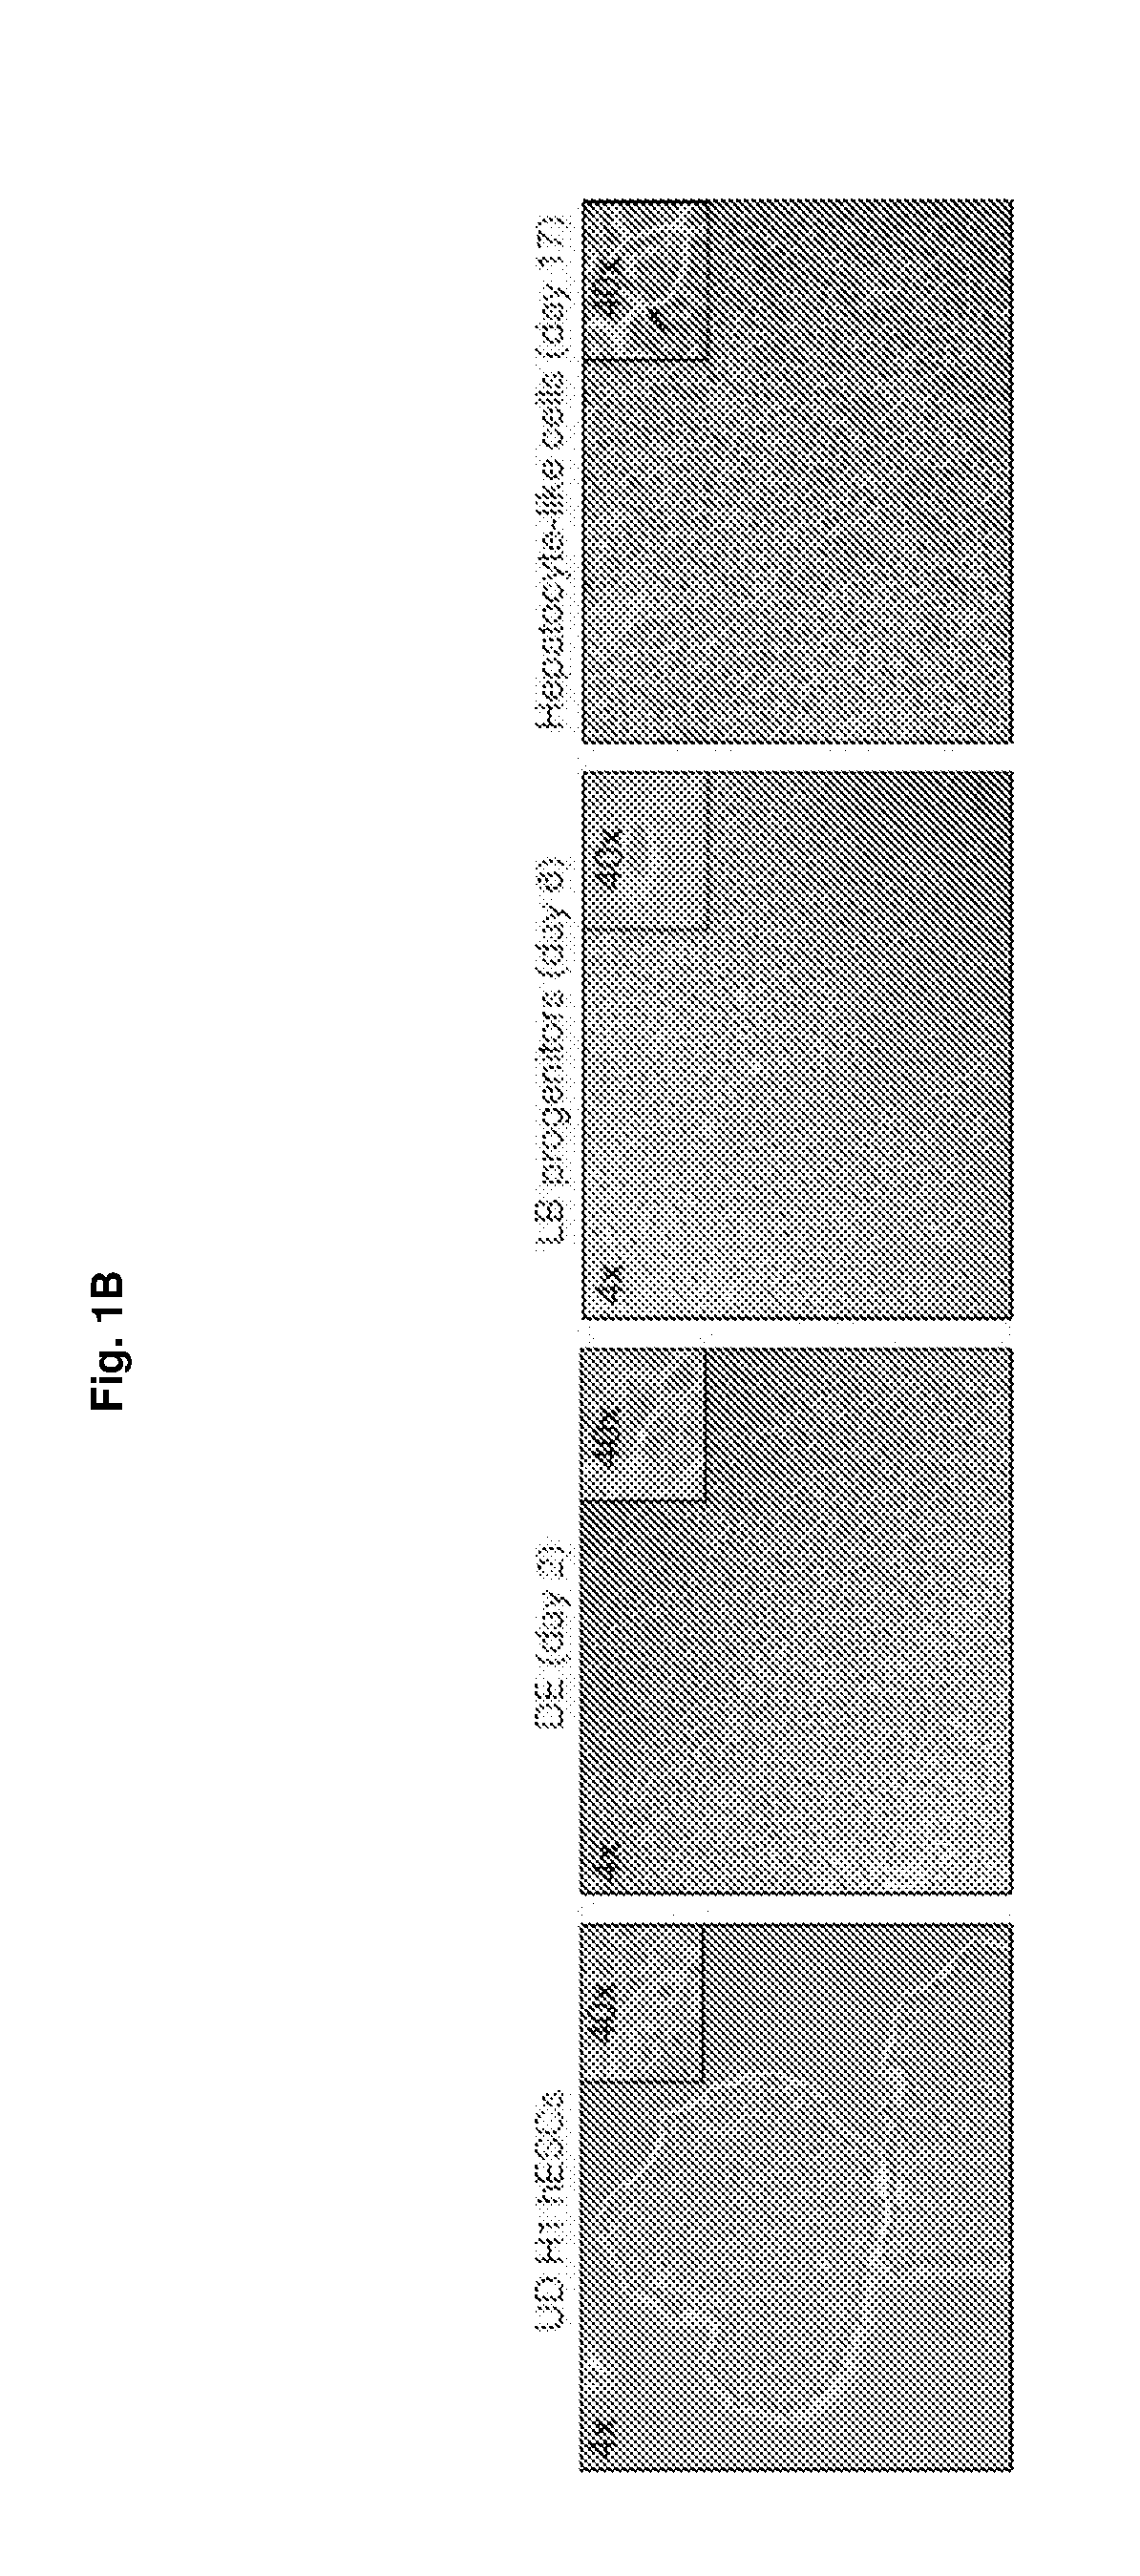 Methods of differentiating stem cells into liver cell lineages